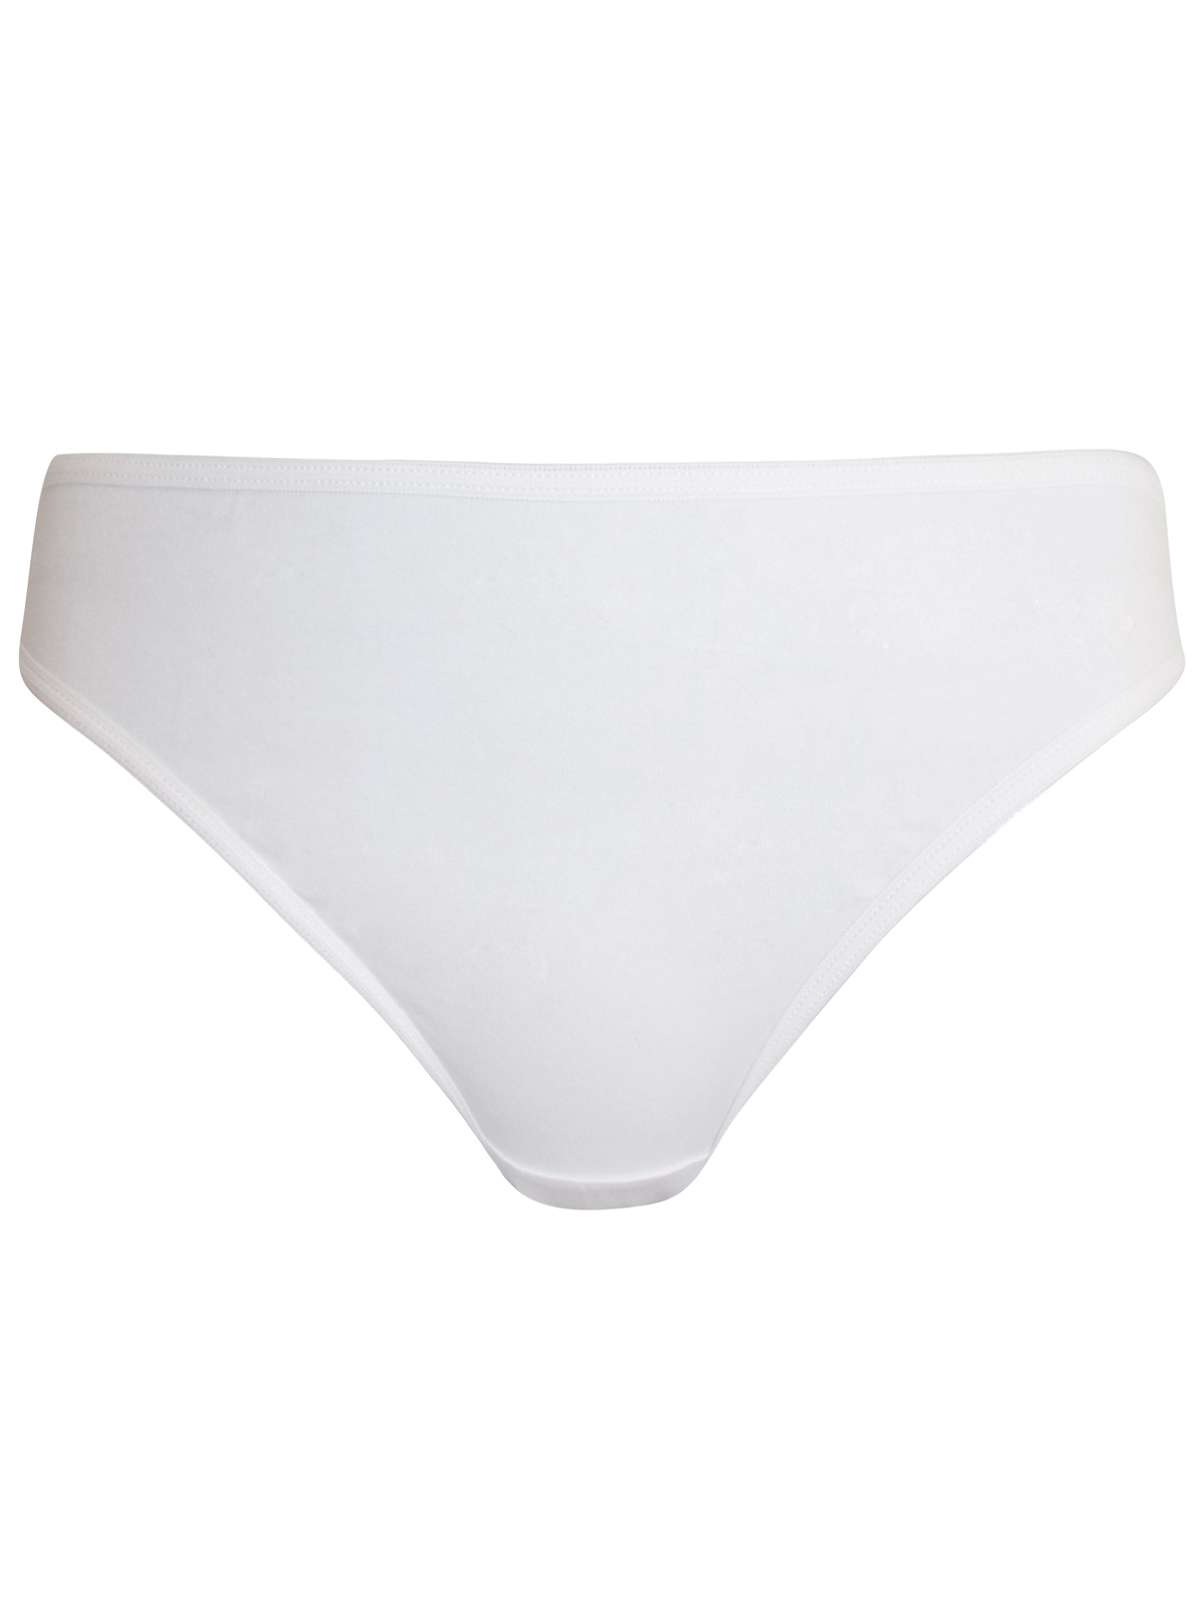 George - - G3orge WHITE 4-Pack Cotton Rich High Leg Knickers - Size 12 ...